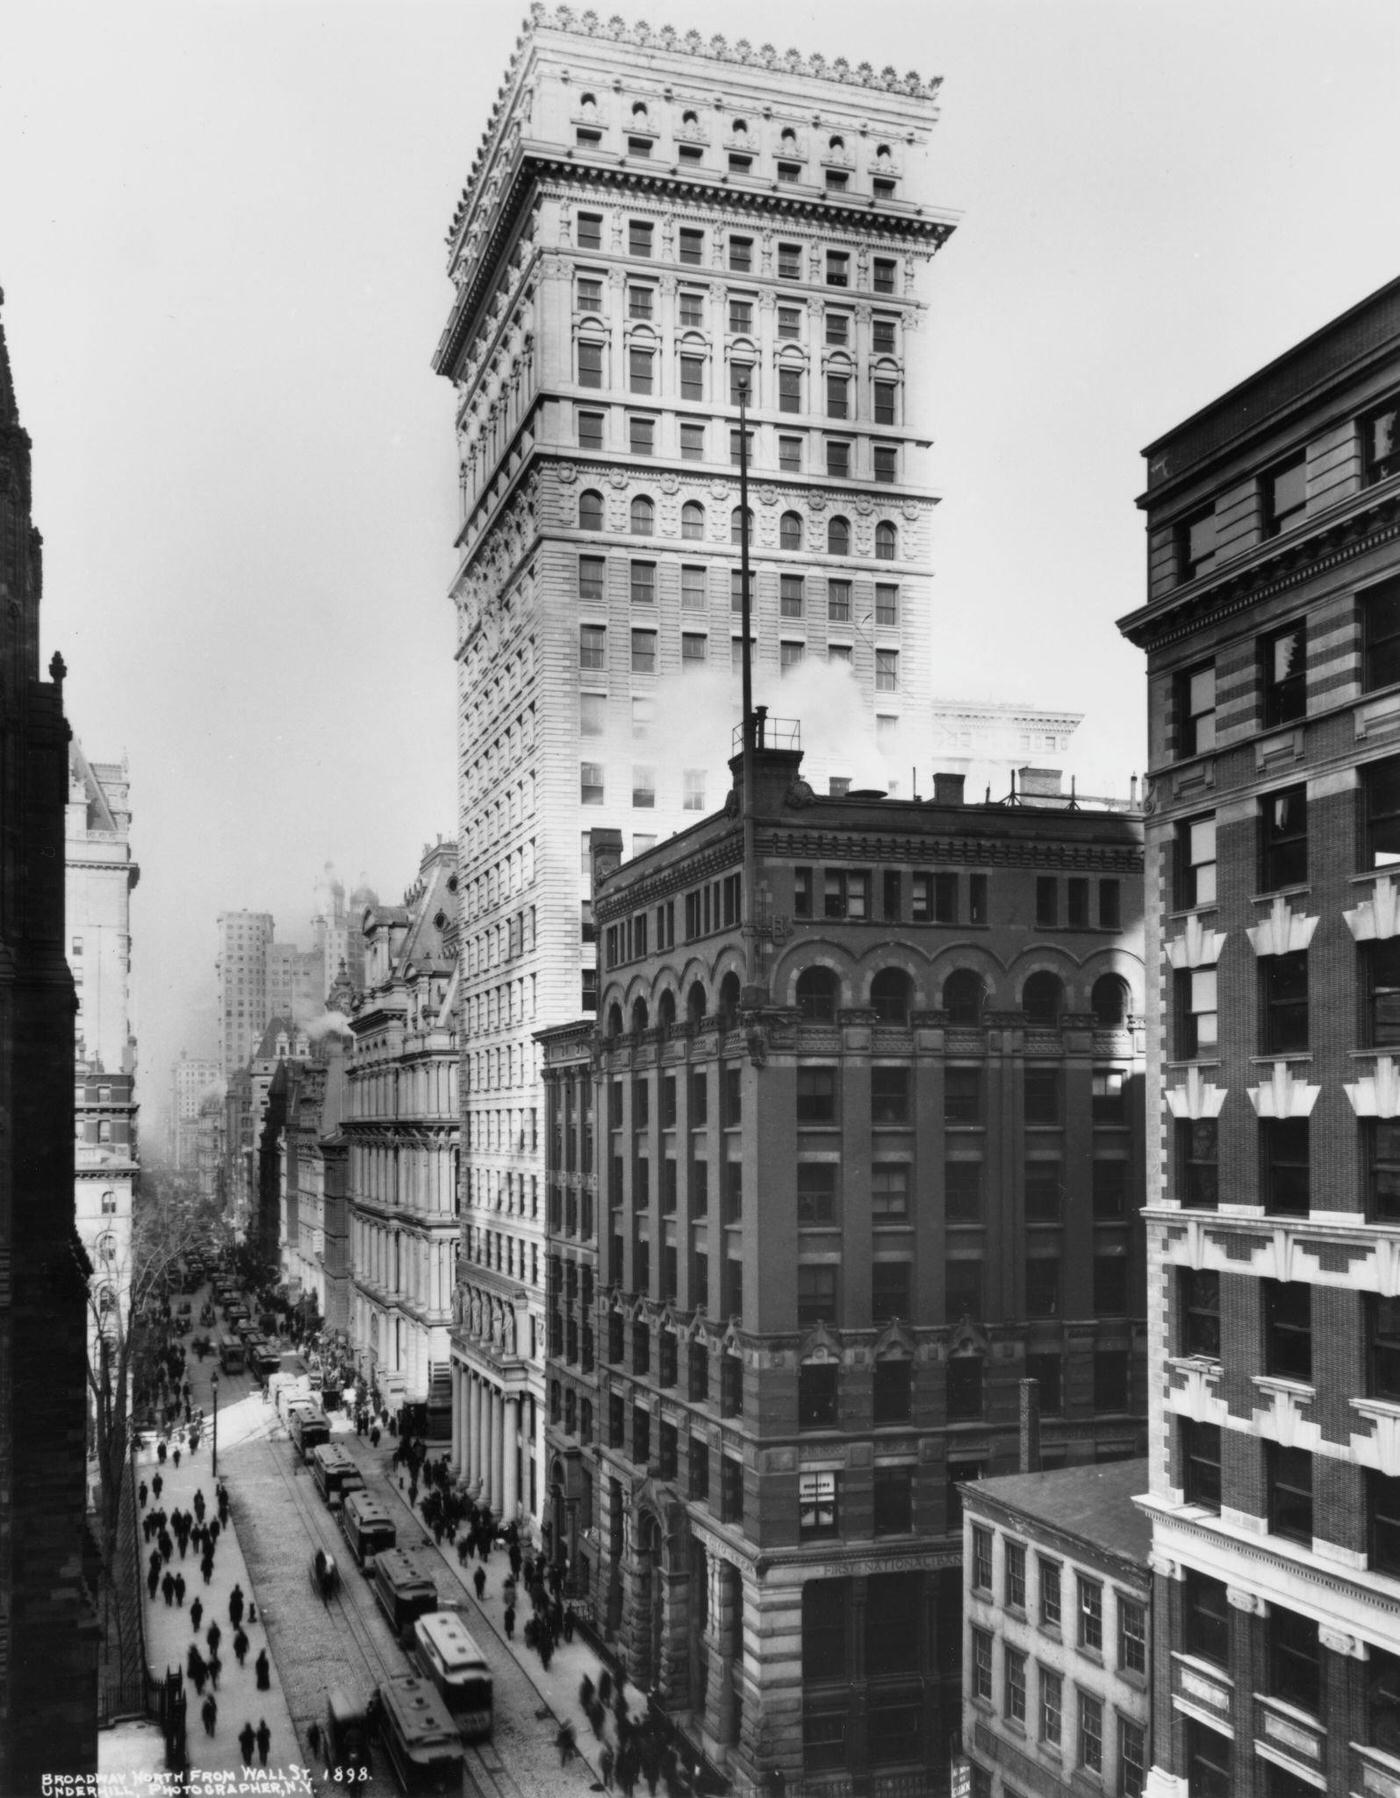 Broadway: Looking North From Wall Street, New York City, 1898.